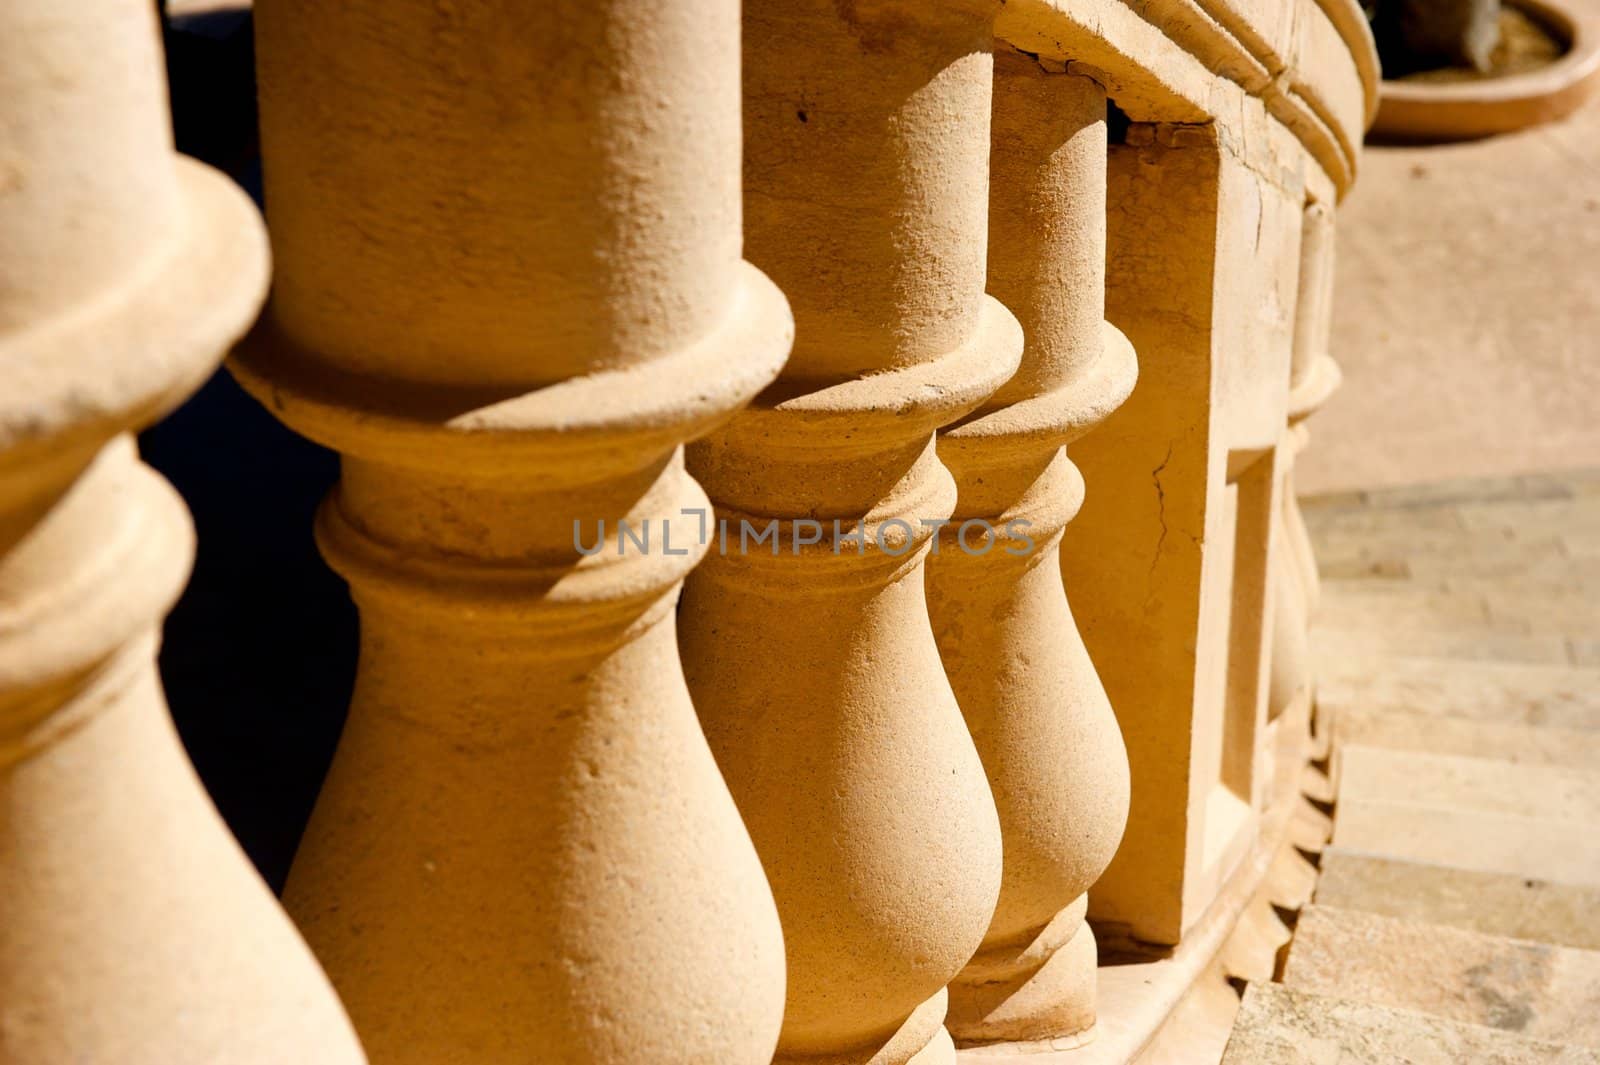 An image of concrete pillars along the edge of a flight of stairs or staircase